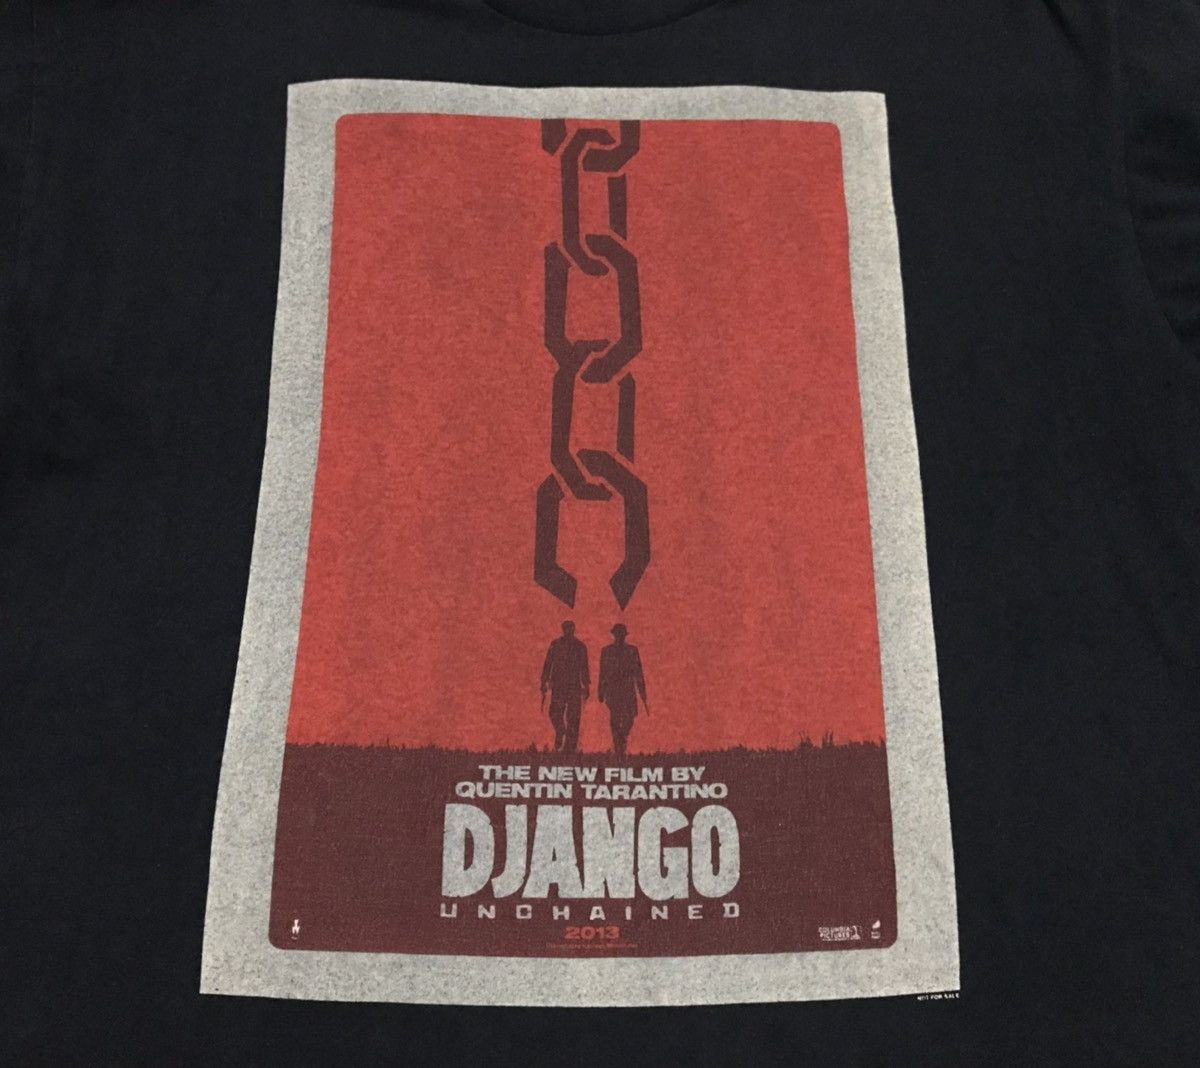 Movie 2013 DJANGO Unchained Promo Movie “not for sale” Tshirt Size US XL / EU 56 / 4 - 2 Preview